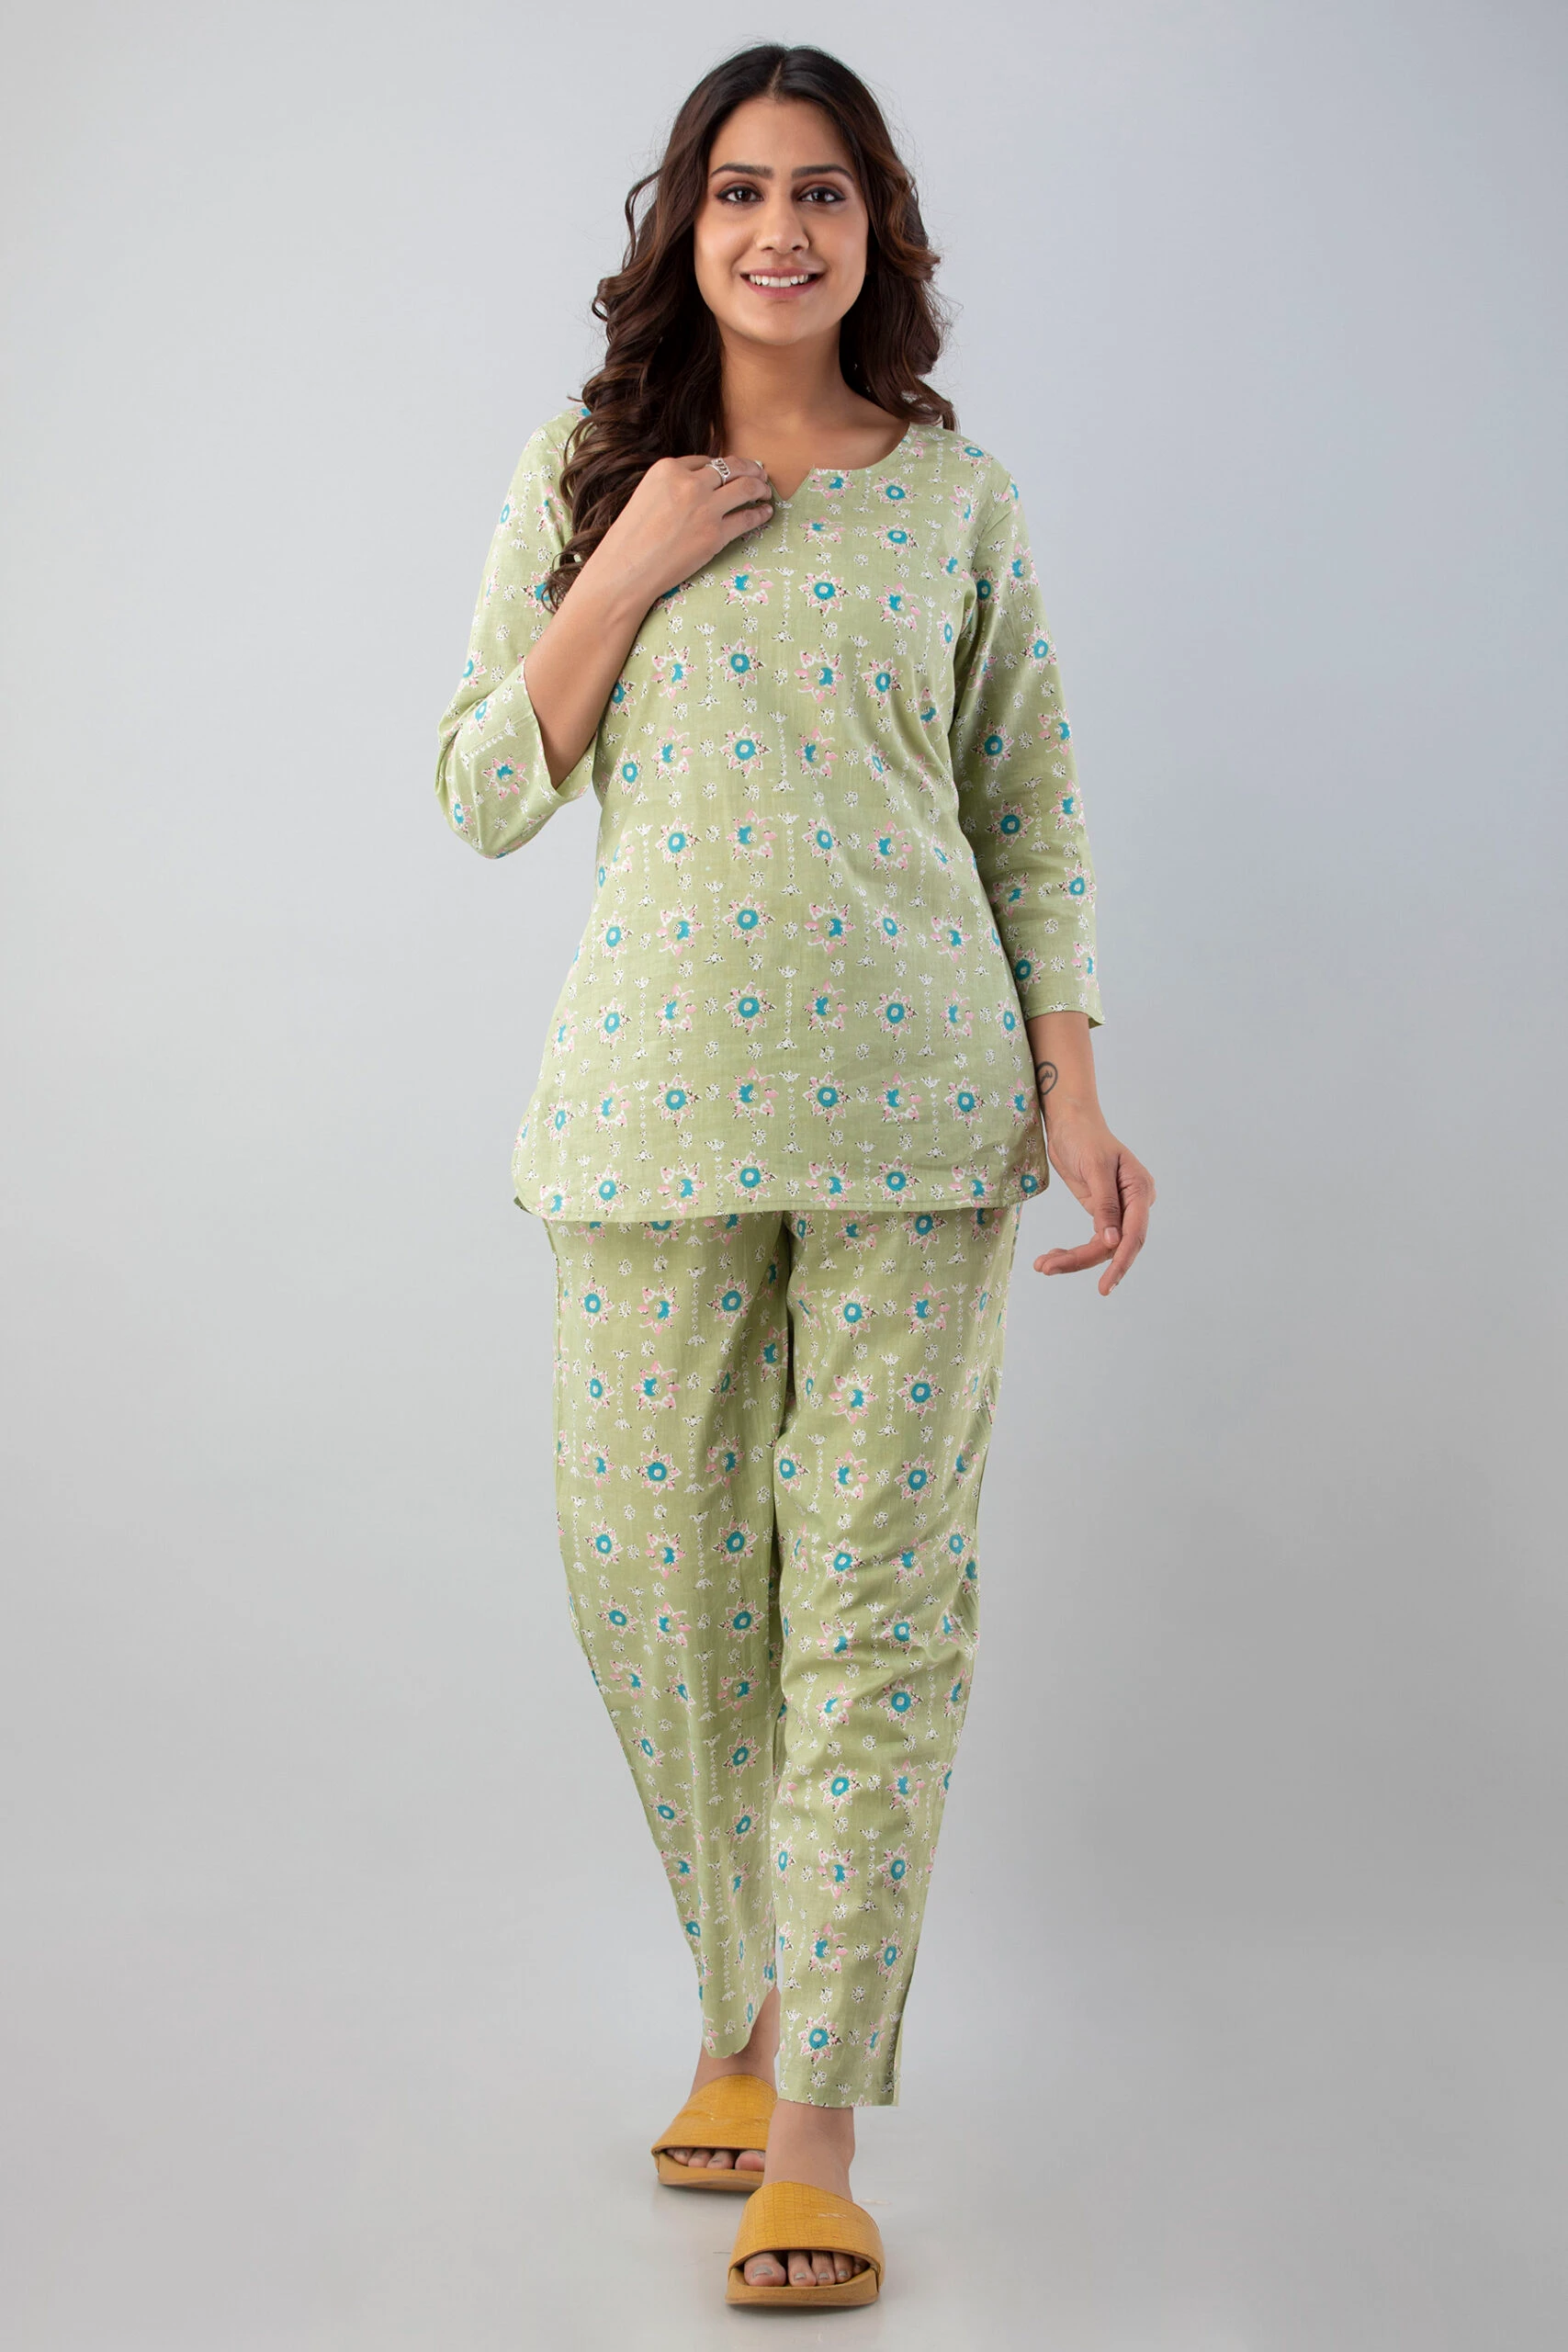 Summer Flower Cotton Pyjama Set For Women Long Pants And Short Shirt Big  Size Comfortable Pep Sleepwear For Ladies For Pregnant And Moms 210622 From  Lu006, $13.62 | DHgate.Com